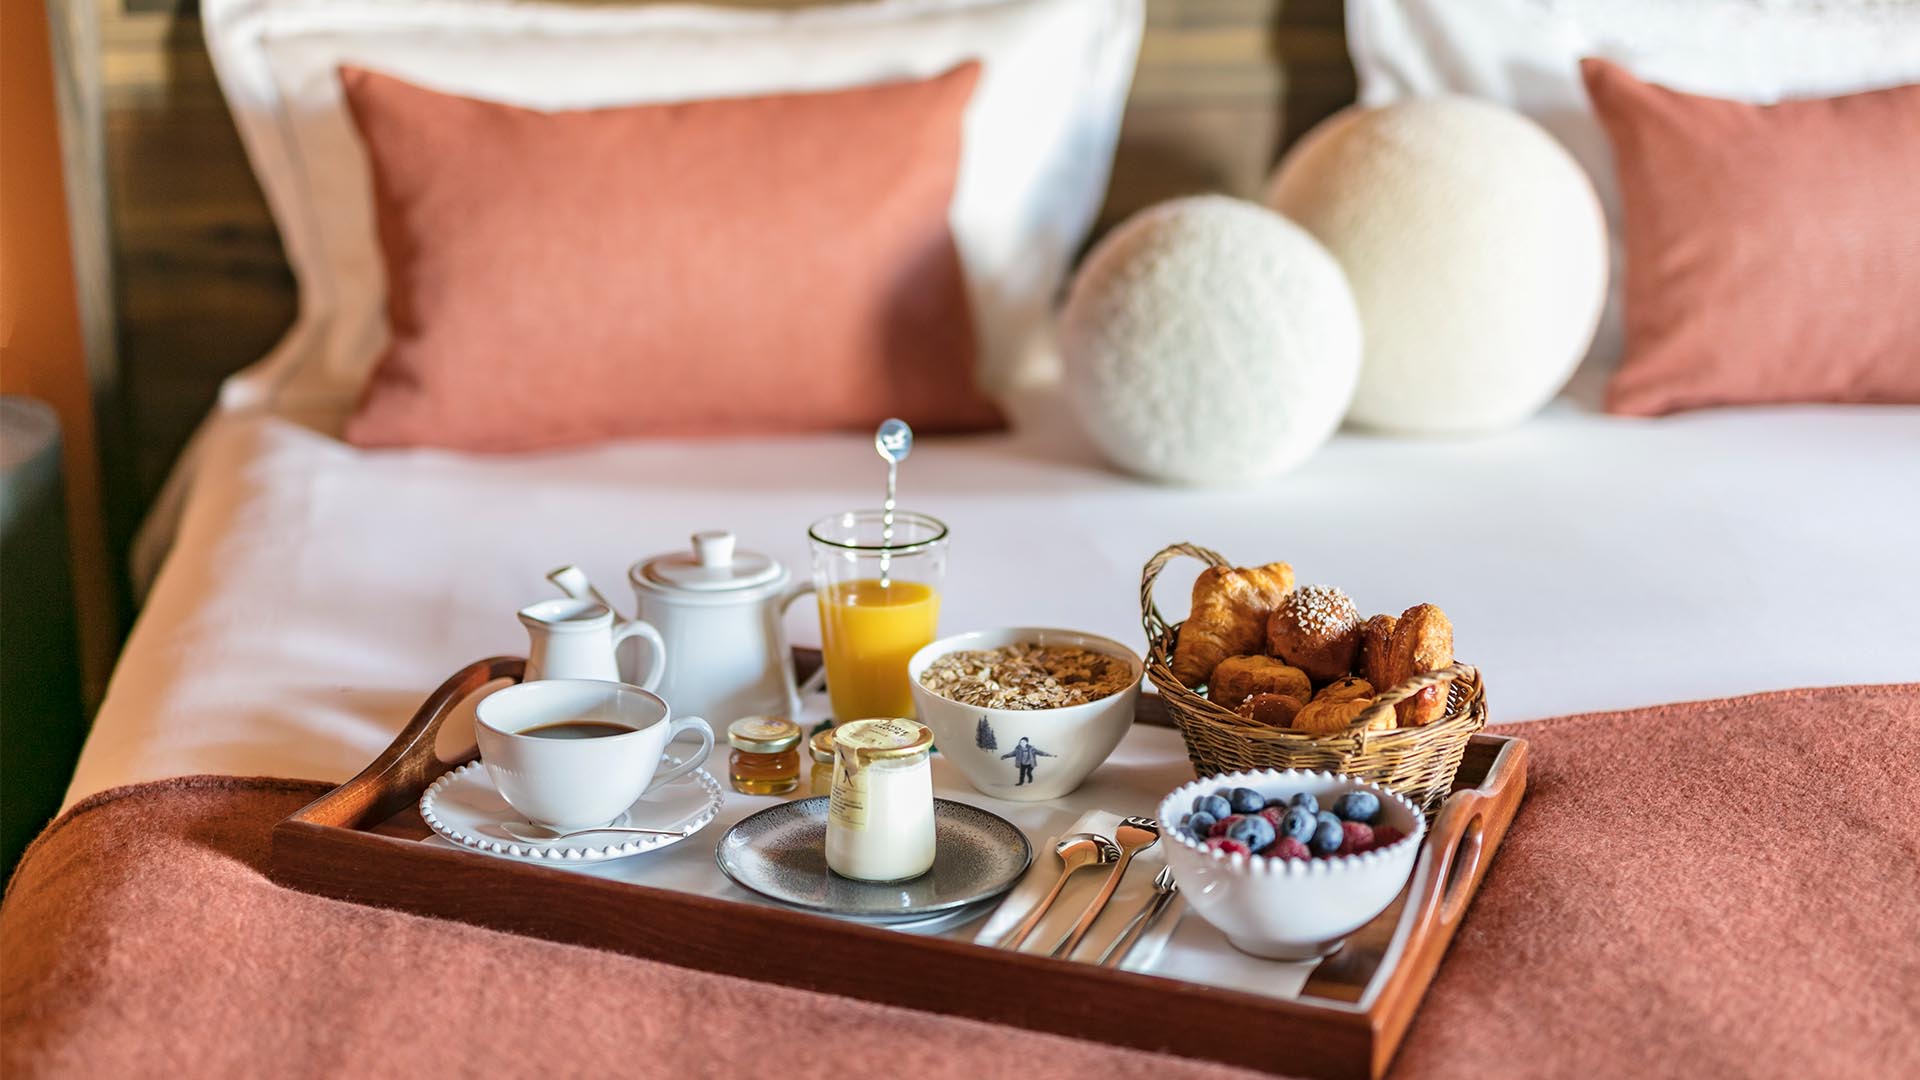 clarisse konan recommends Pictures Of Breakfast In Bed